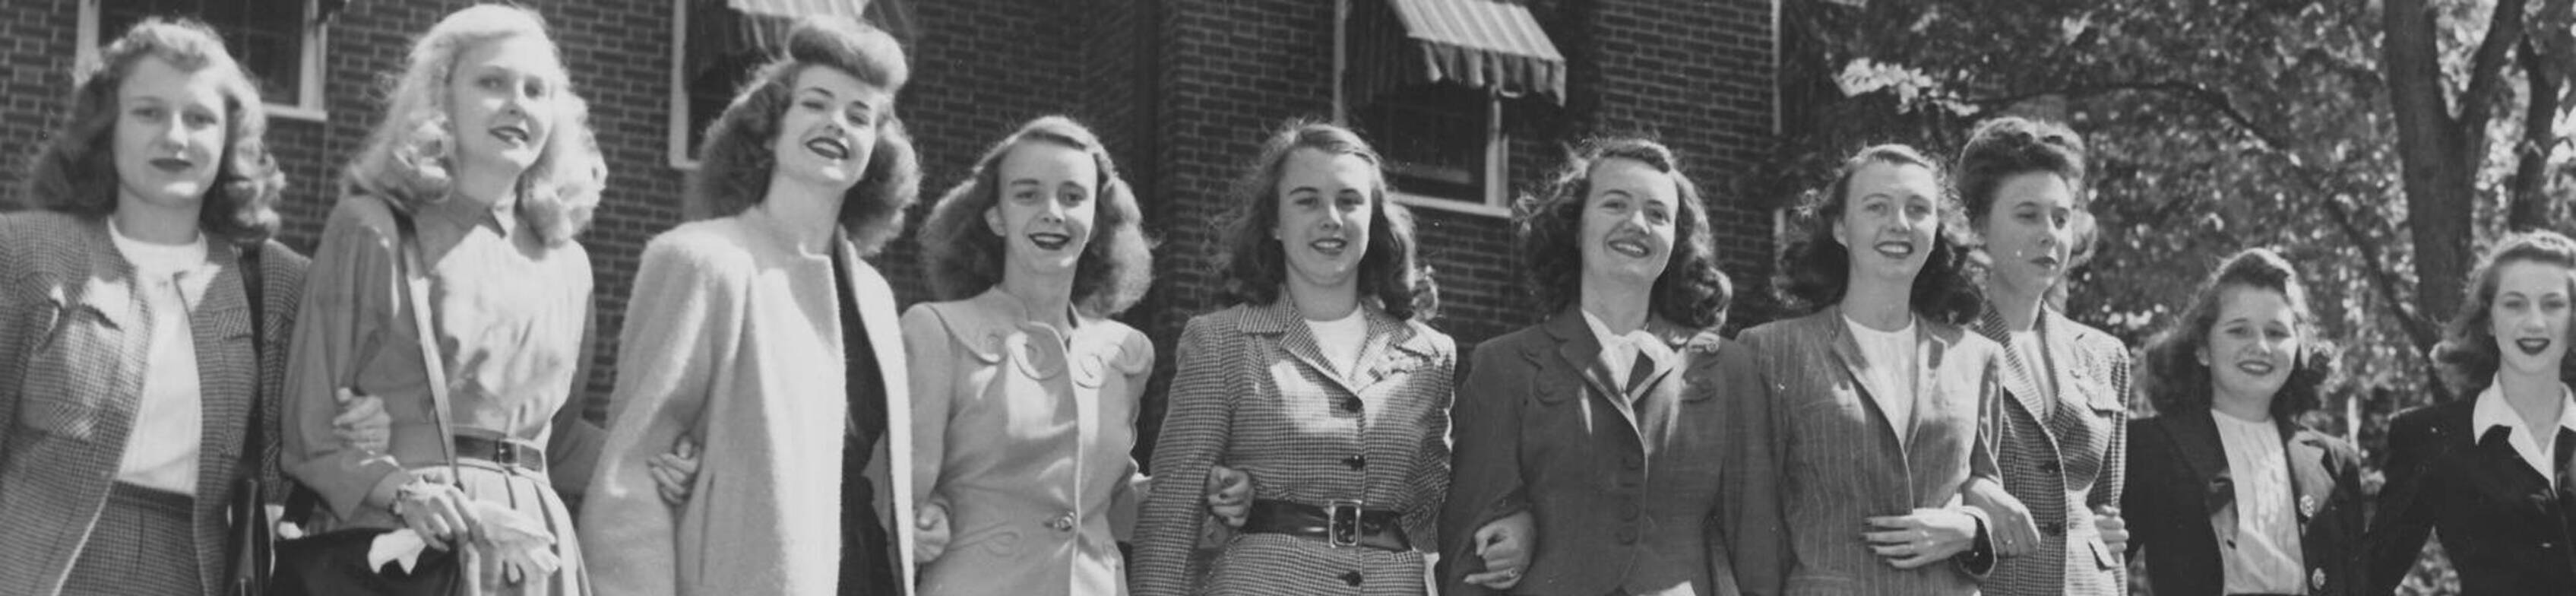 Ursuline college old photo of students in the 1940s